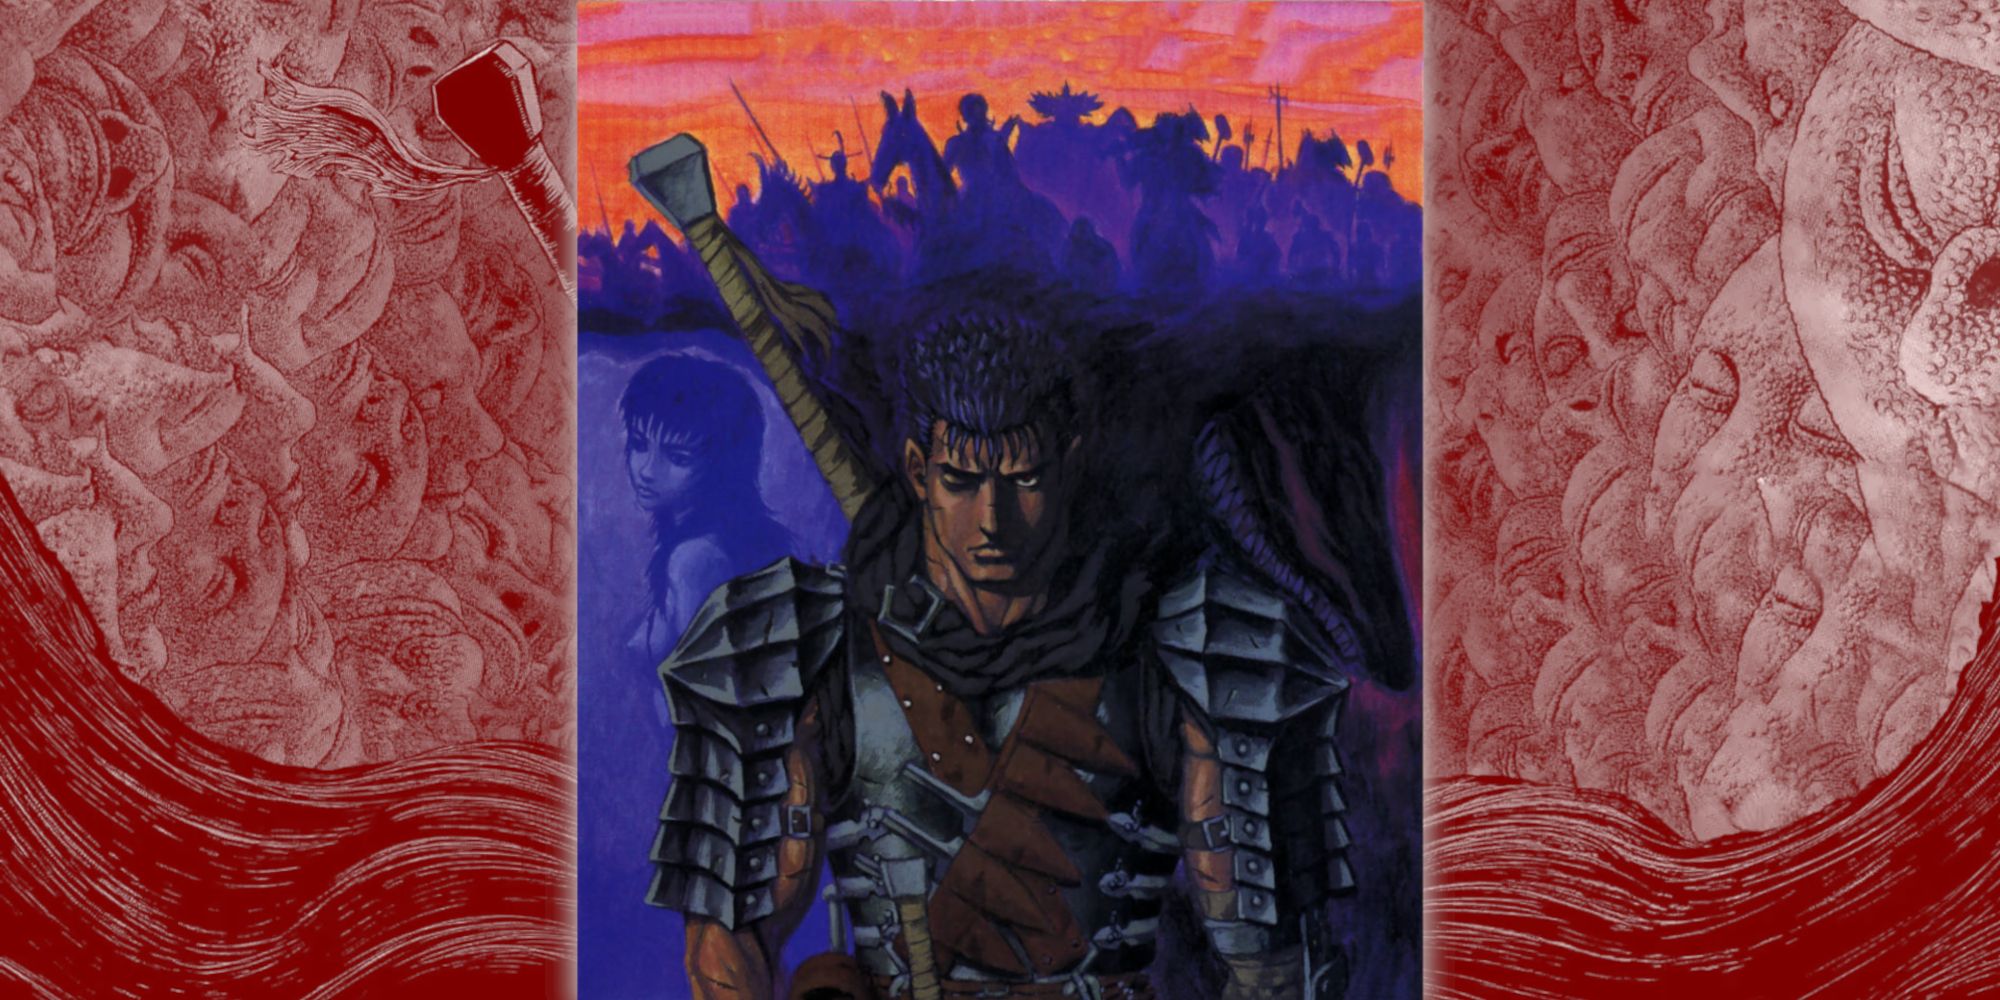 A collage style image featuring official manga art from Berserk, with a full color art spread of Guts in the center of the image.